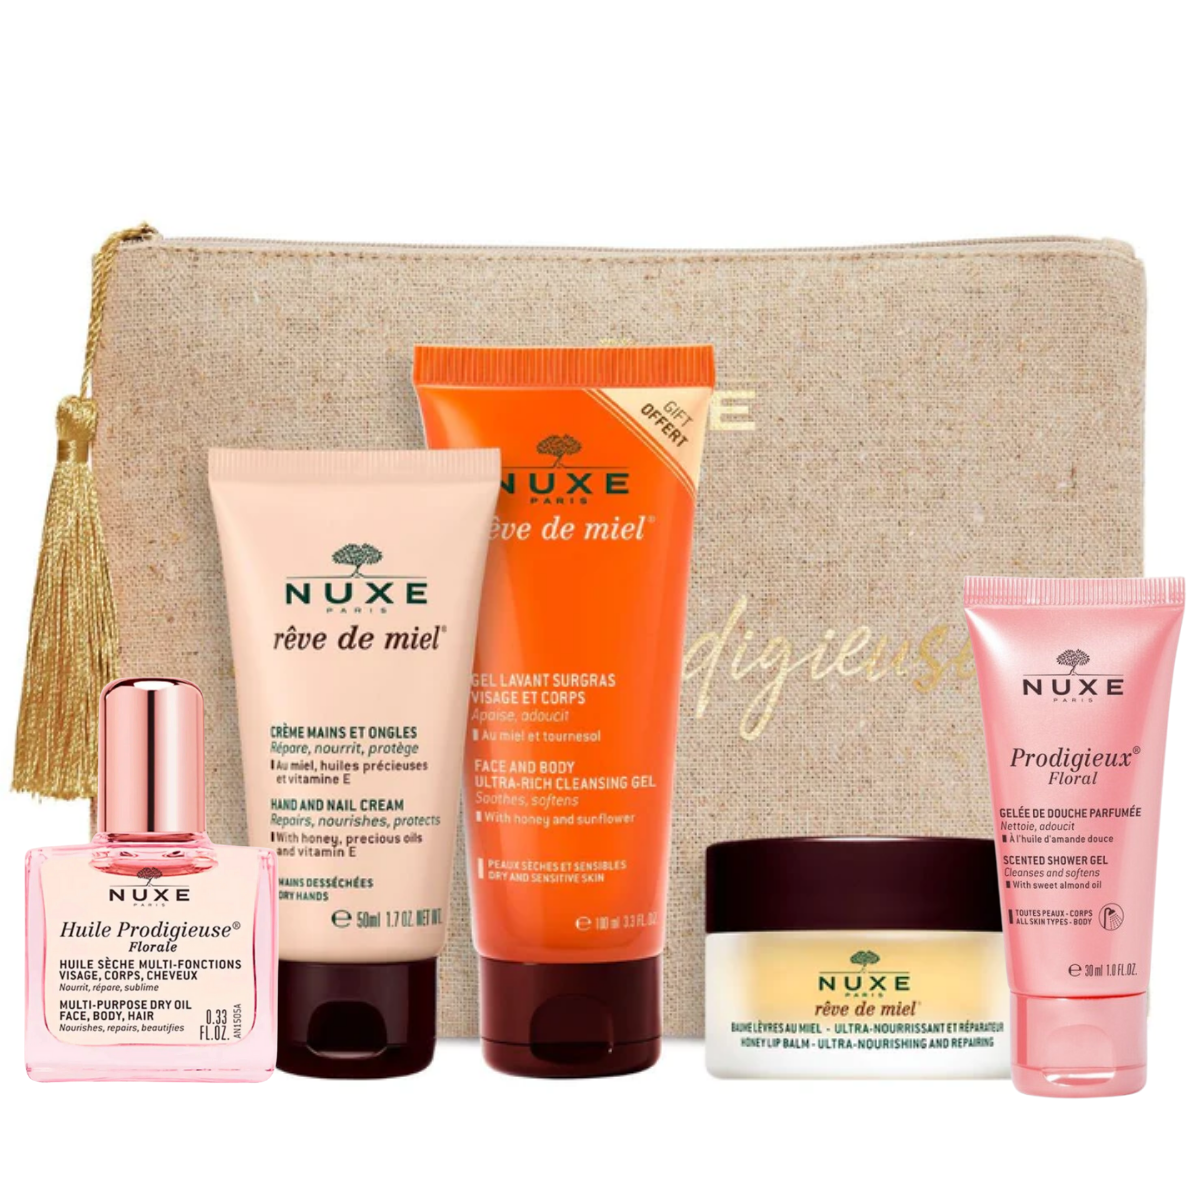 NUXE Loved by Millies Travel Kit - EXCLUSIVE TO MILLIES